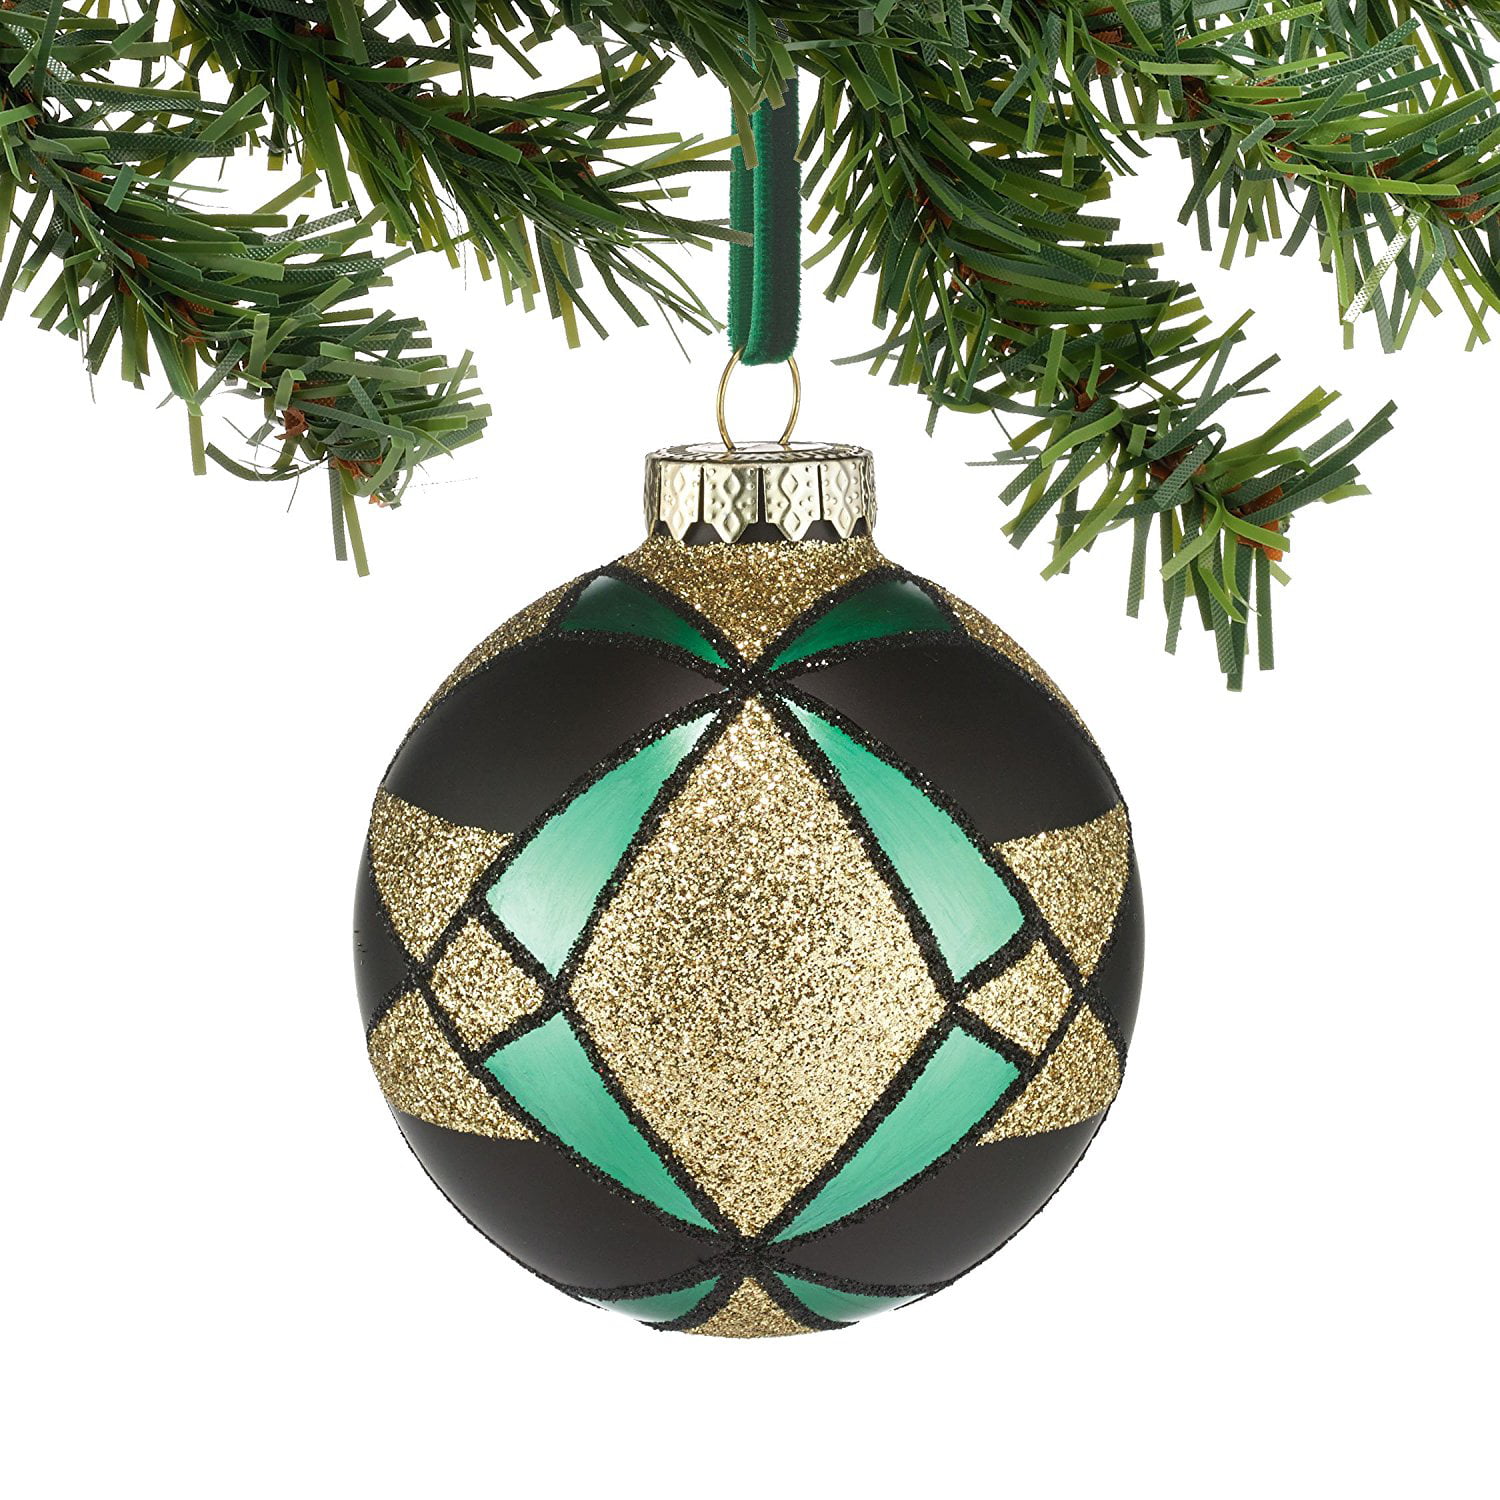 Department 56 Gallery Pattern Ball Ornament 